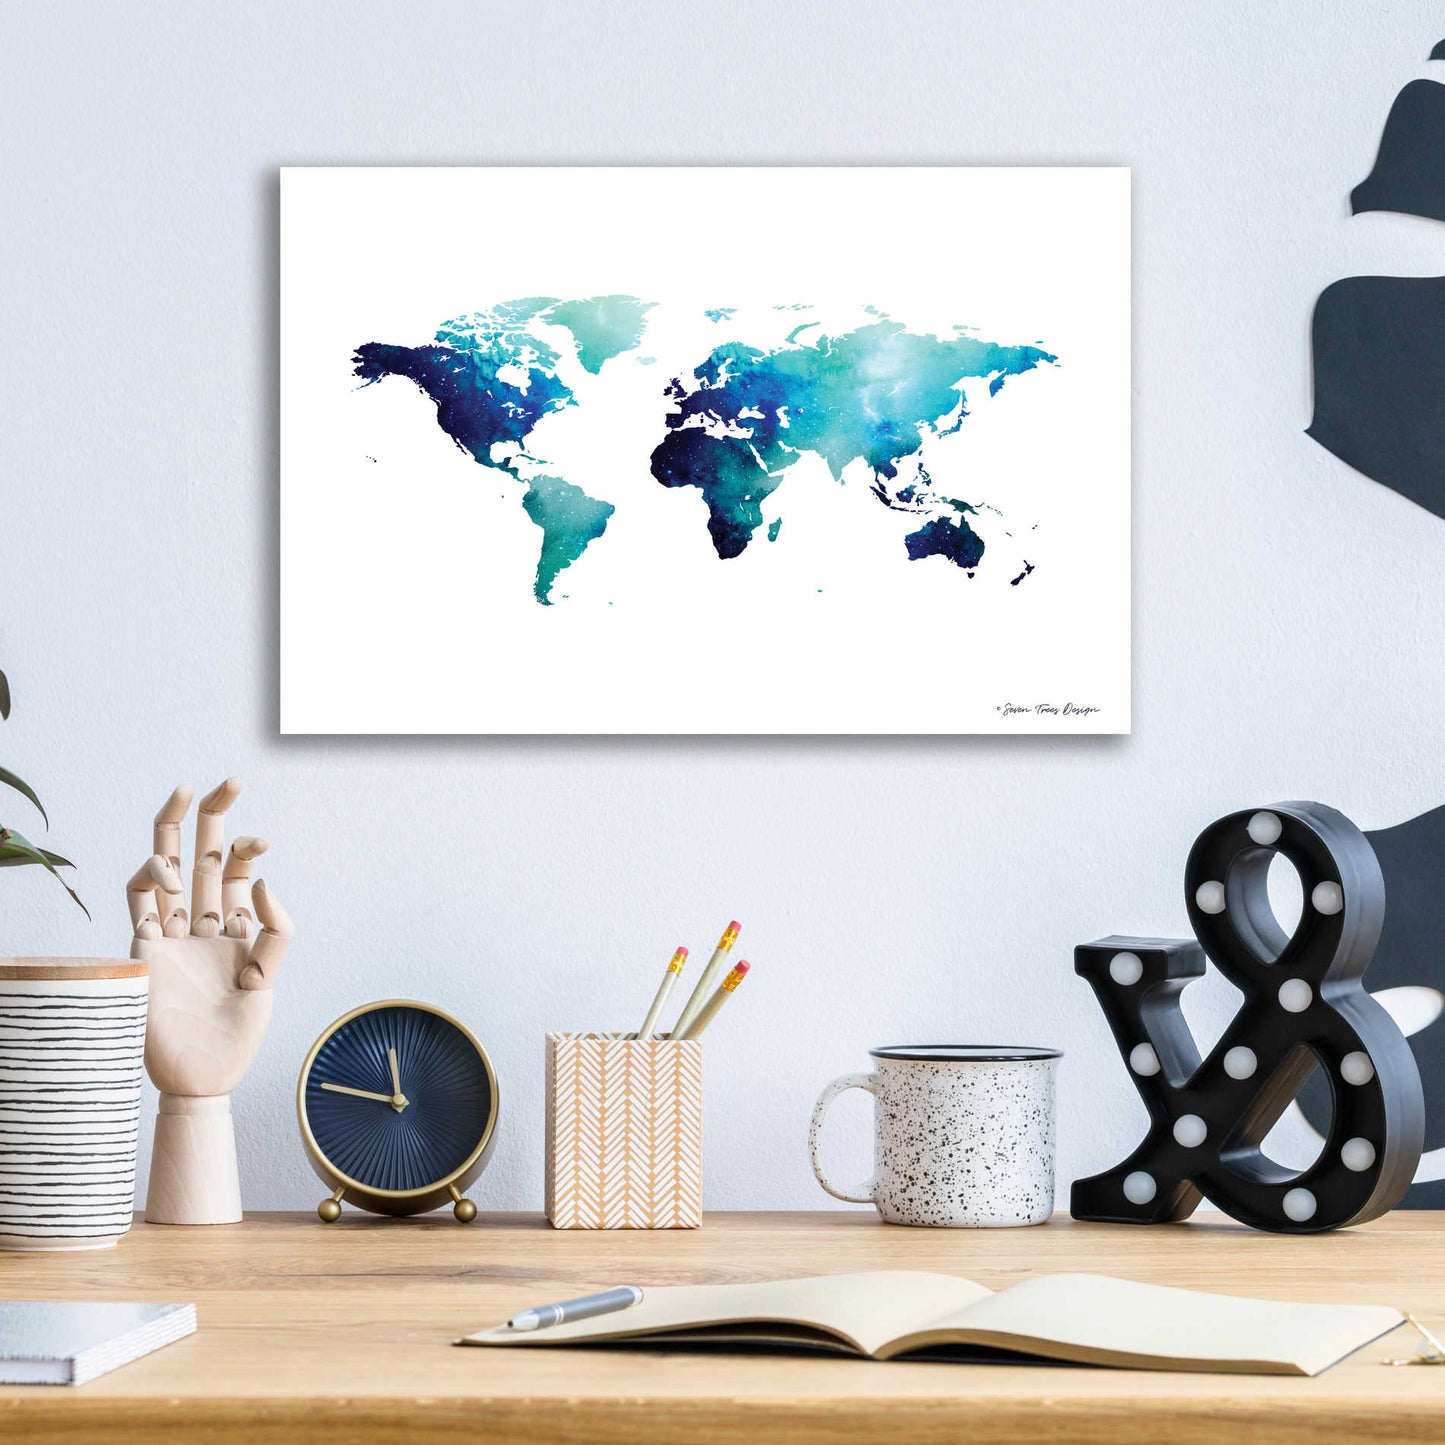 Epic Art 'Blue Space World Map' by Seven Trees Design, Acrylic Glass Wall Art,16x12